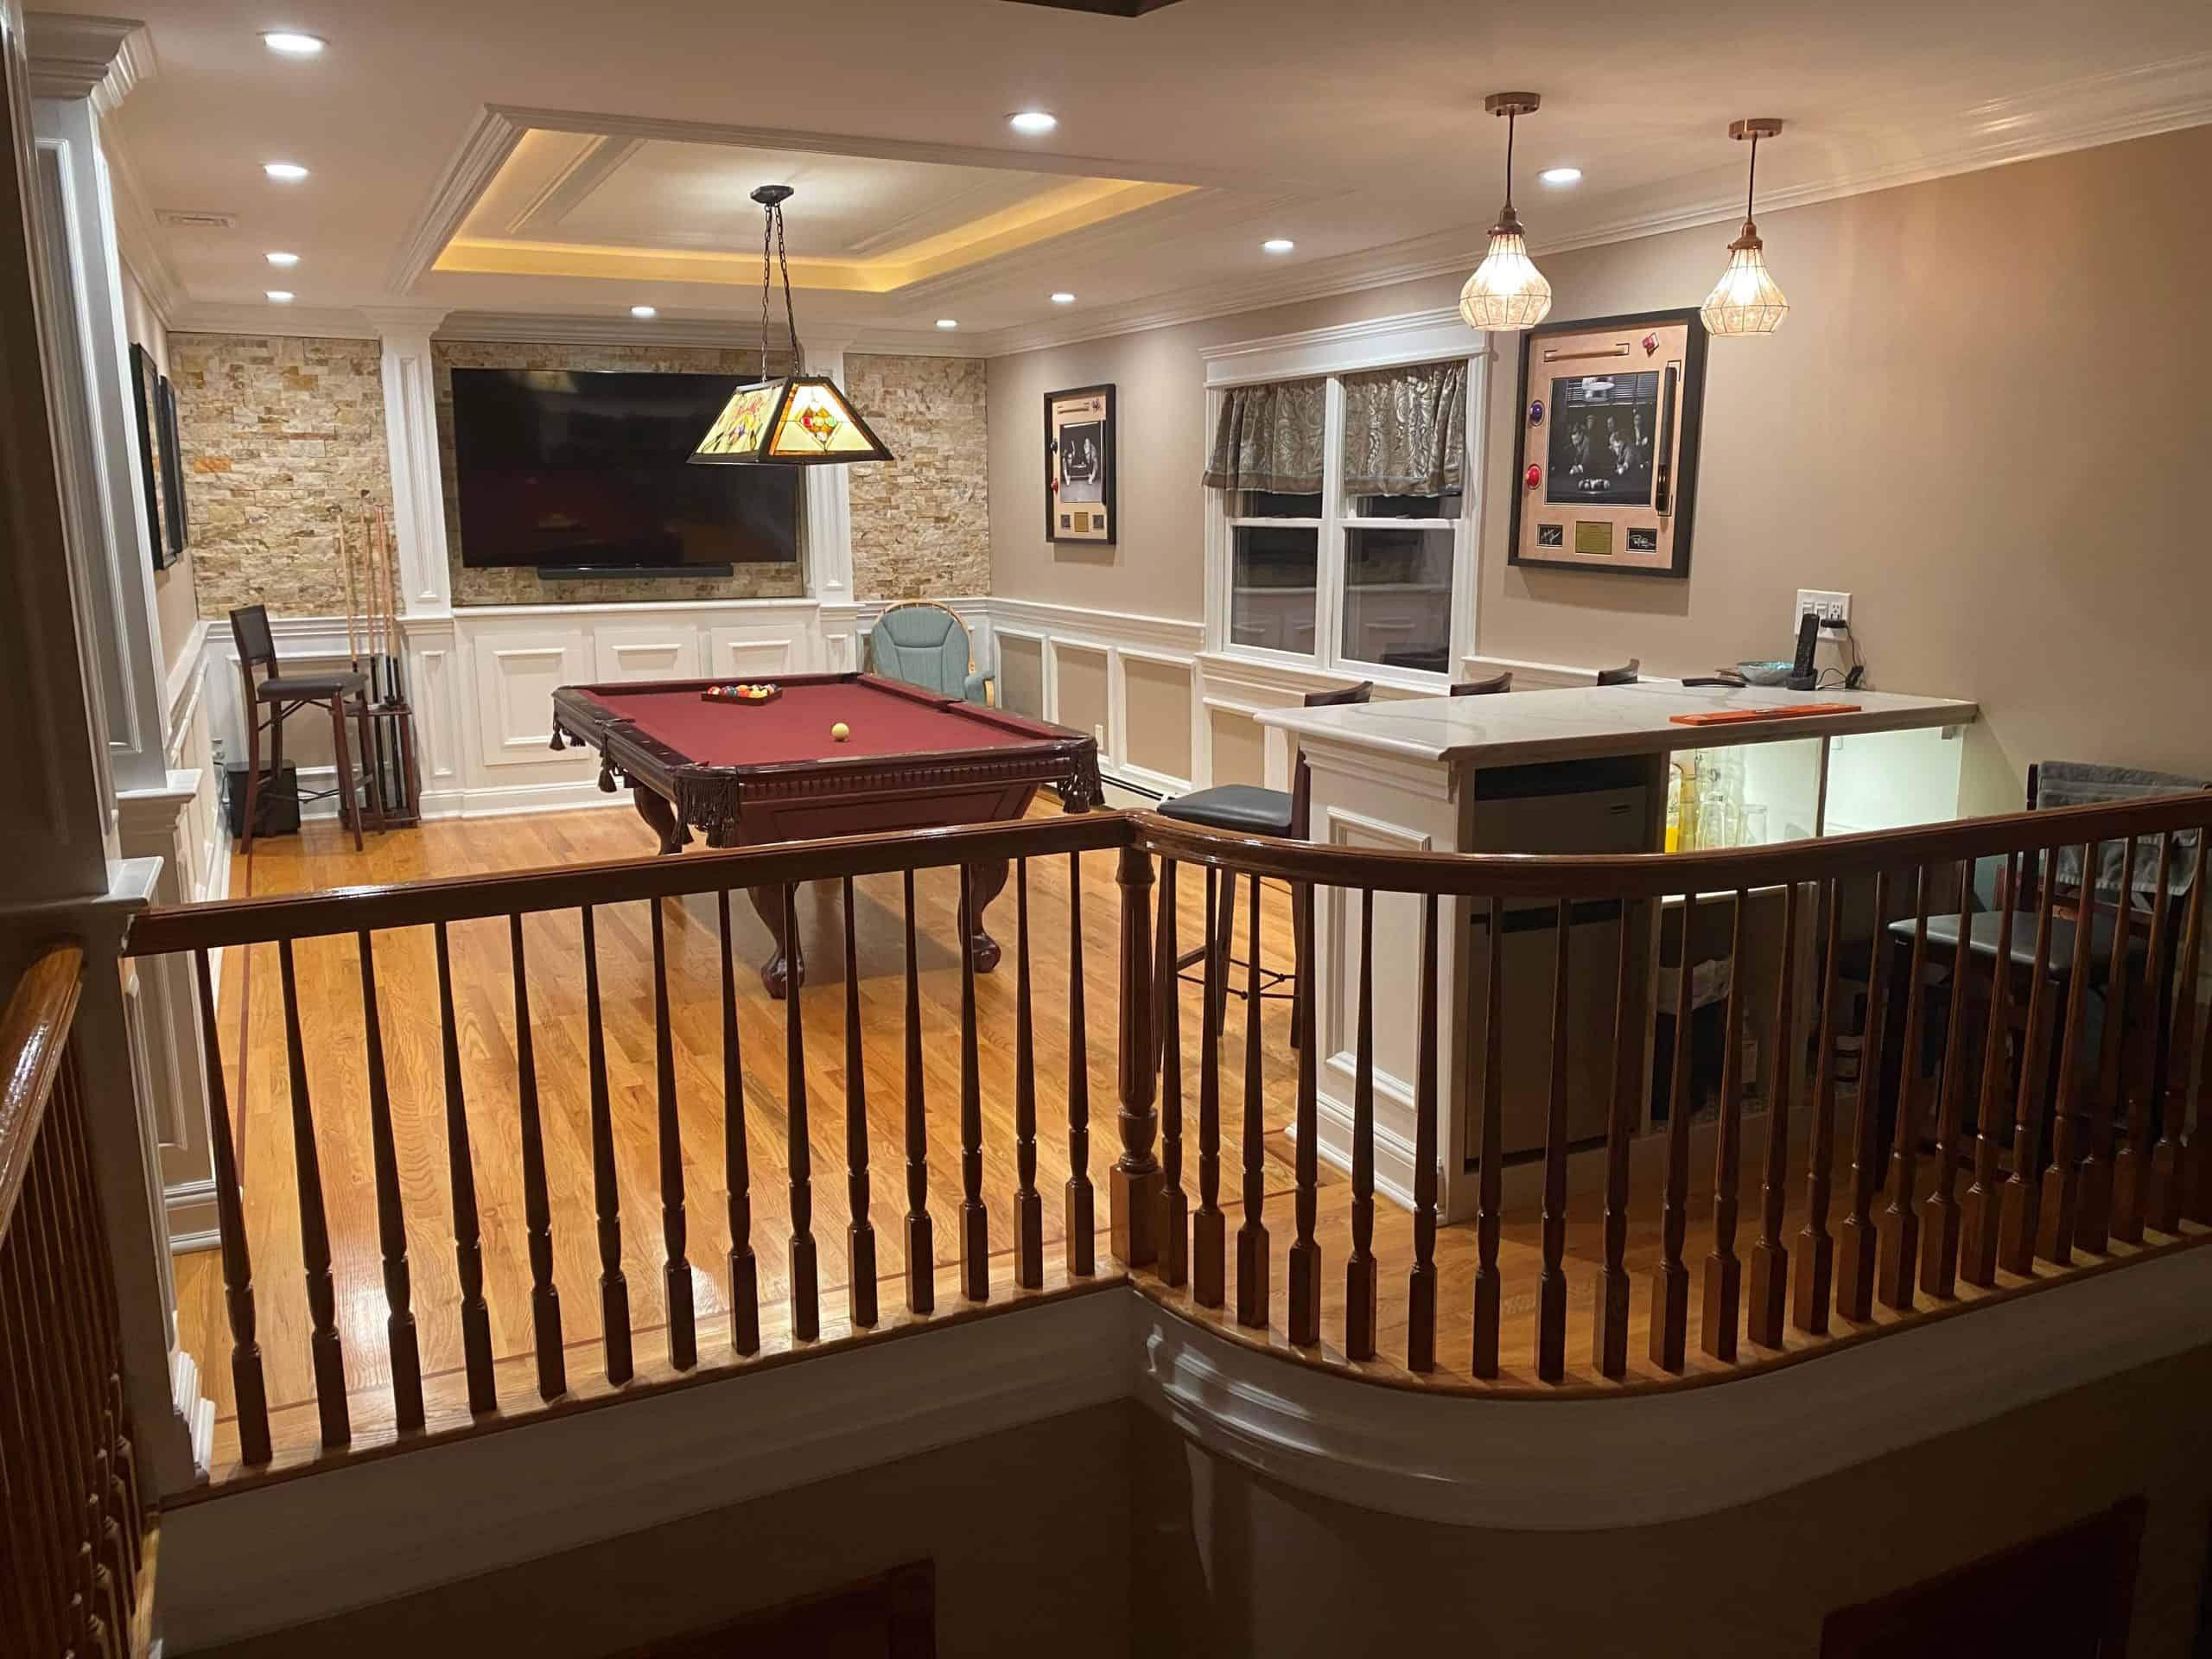 Recently completed billiards area in a home.